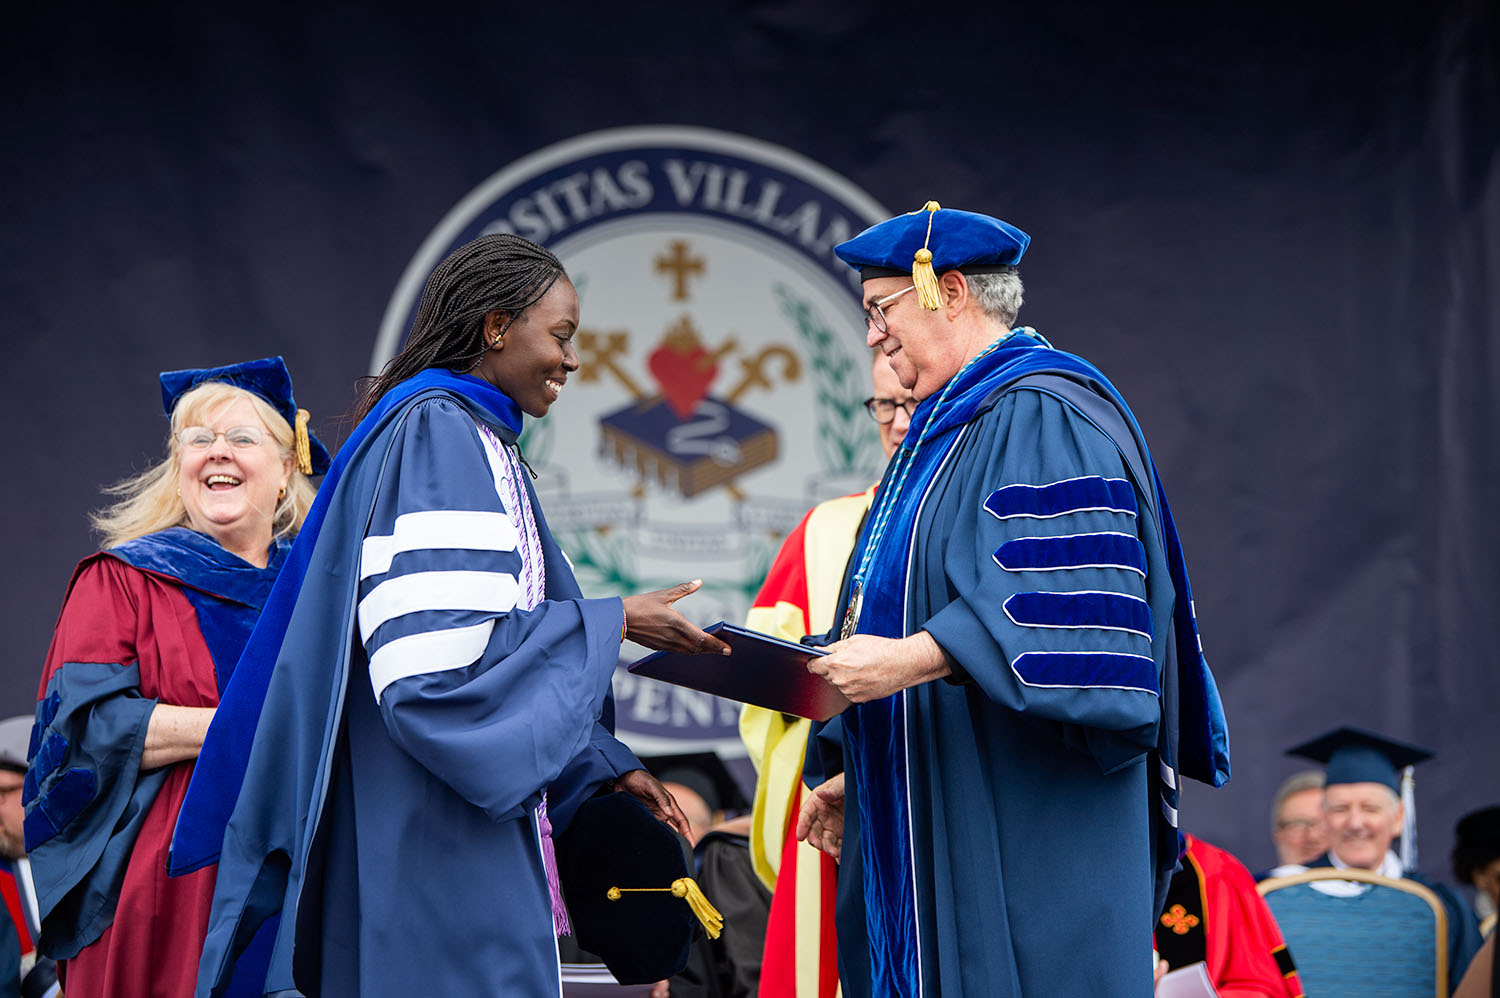 Female Villanova student wearing a graduation robe and receiving her diploma.